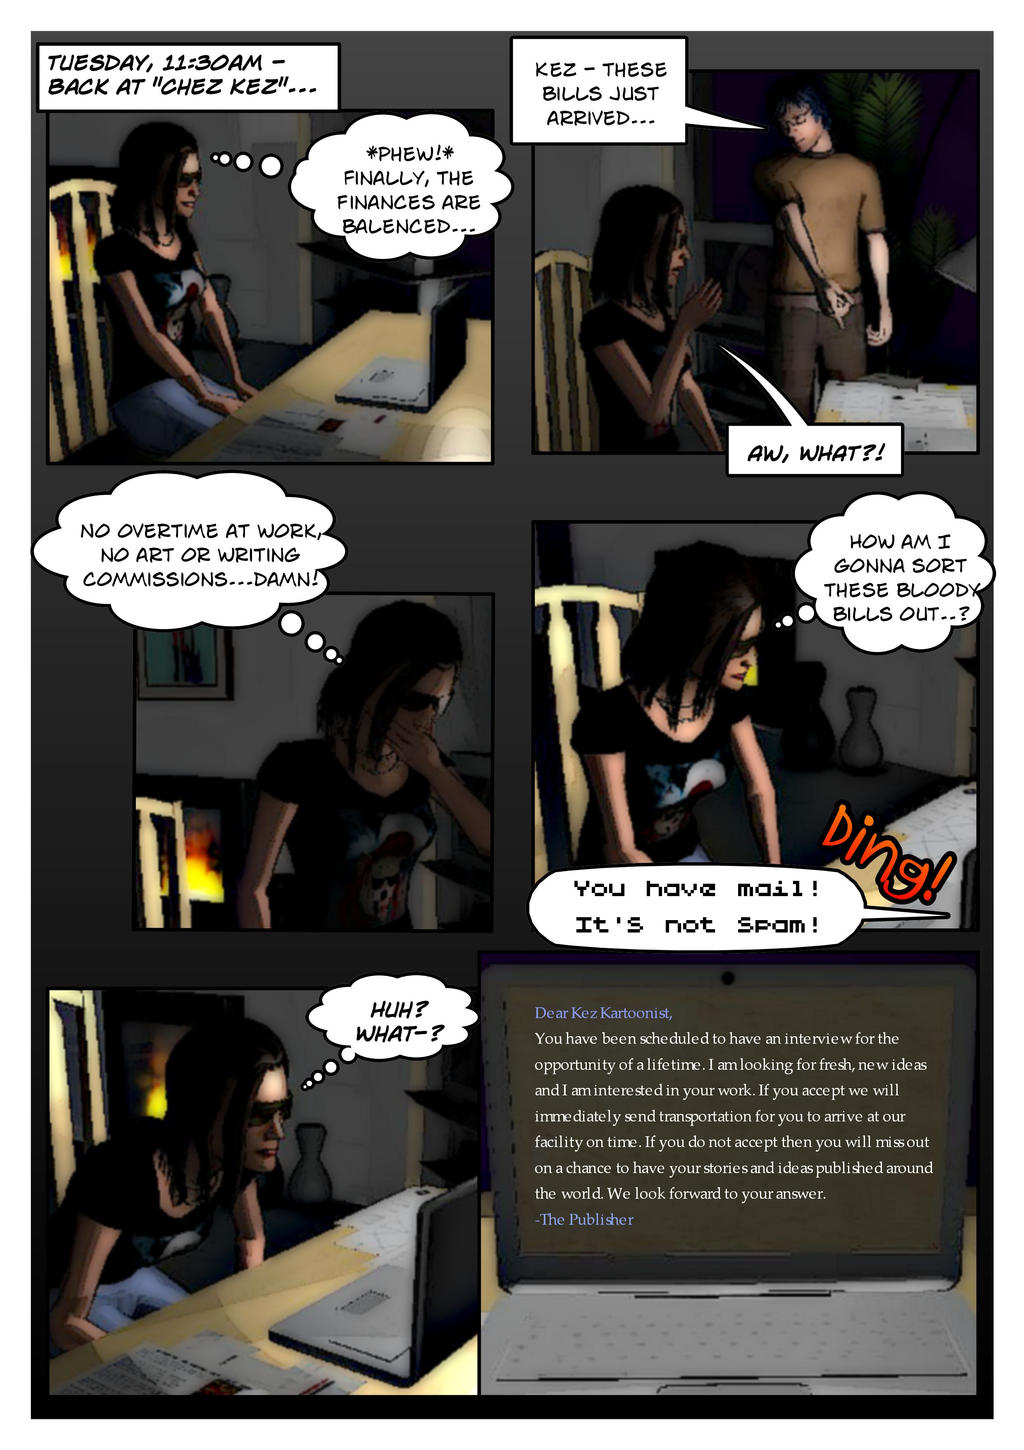 Publisher OCT Audition_Page 3